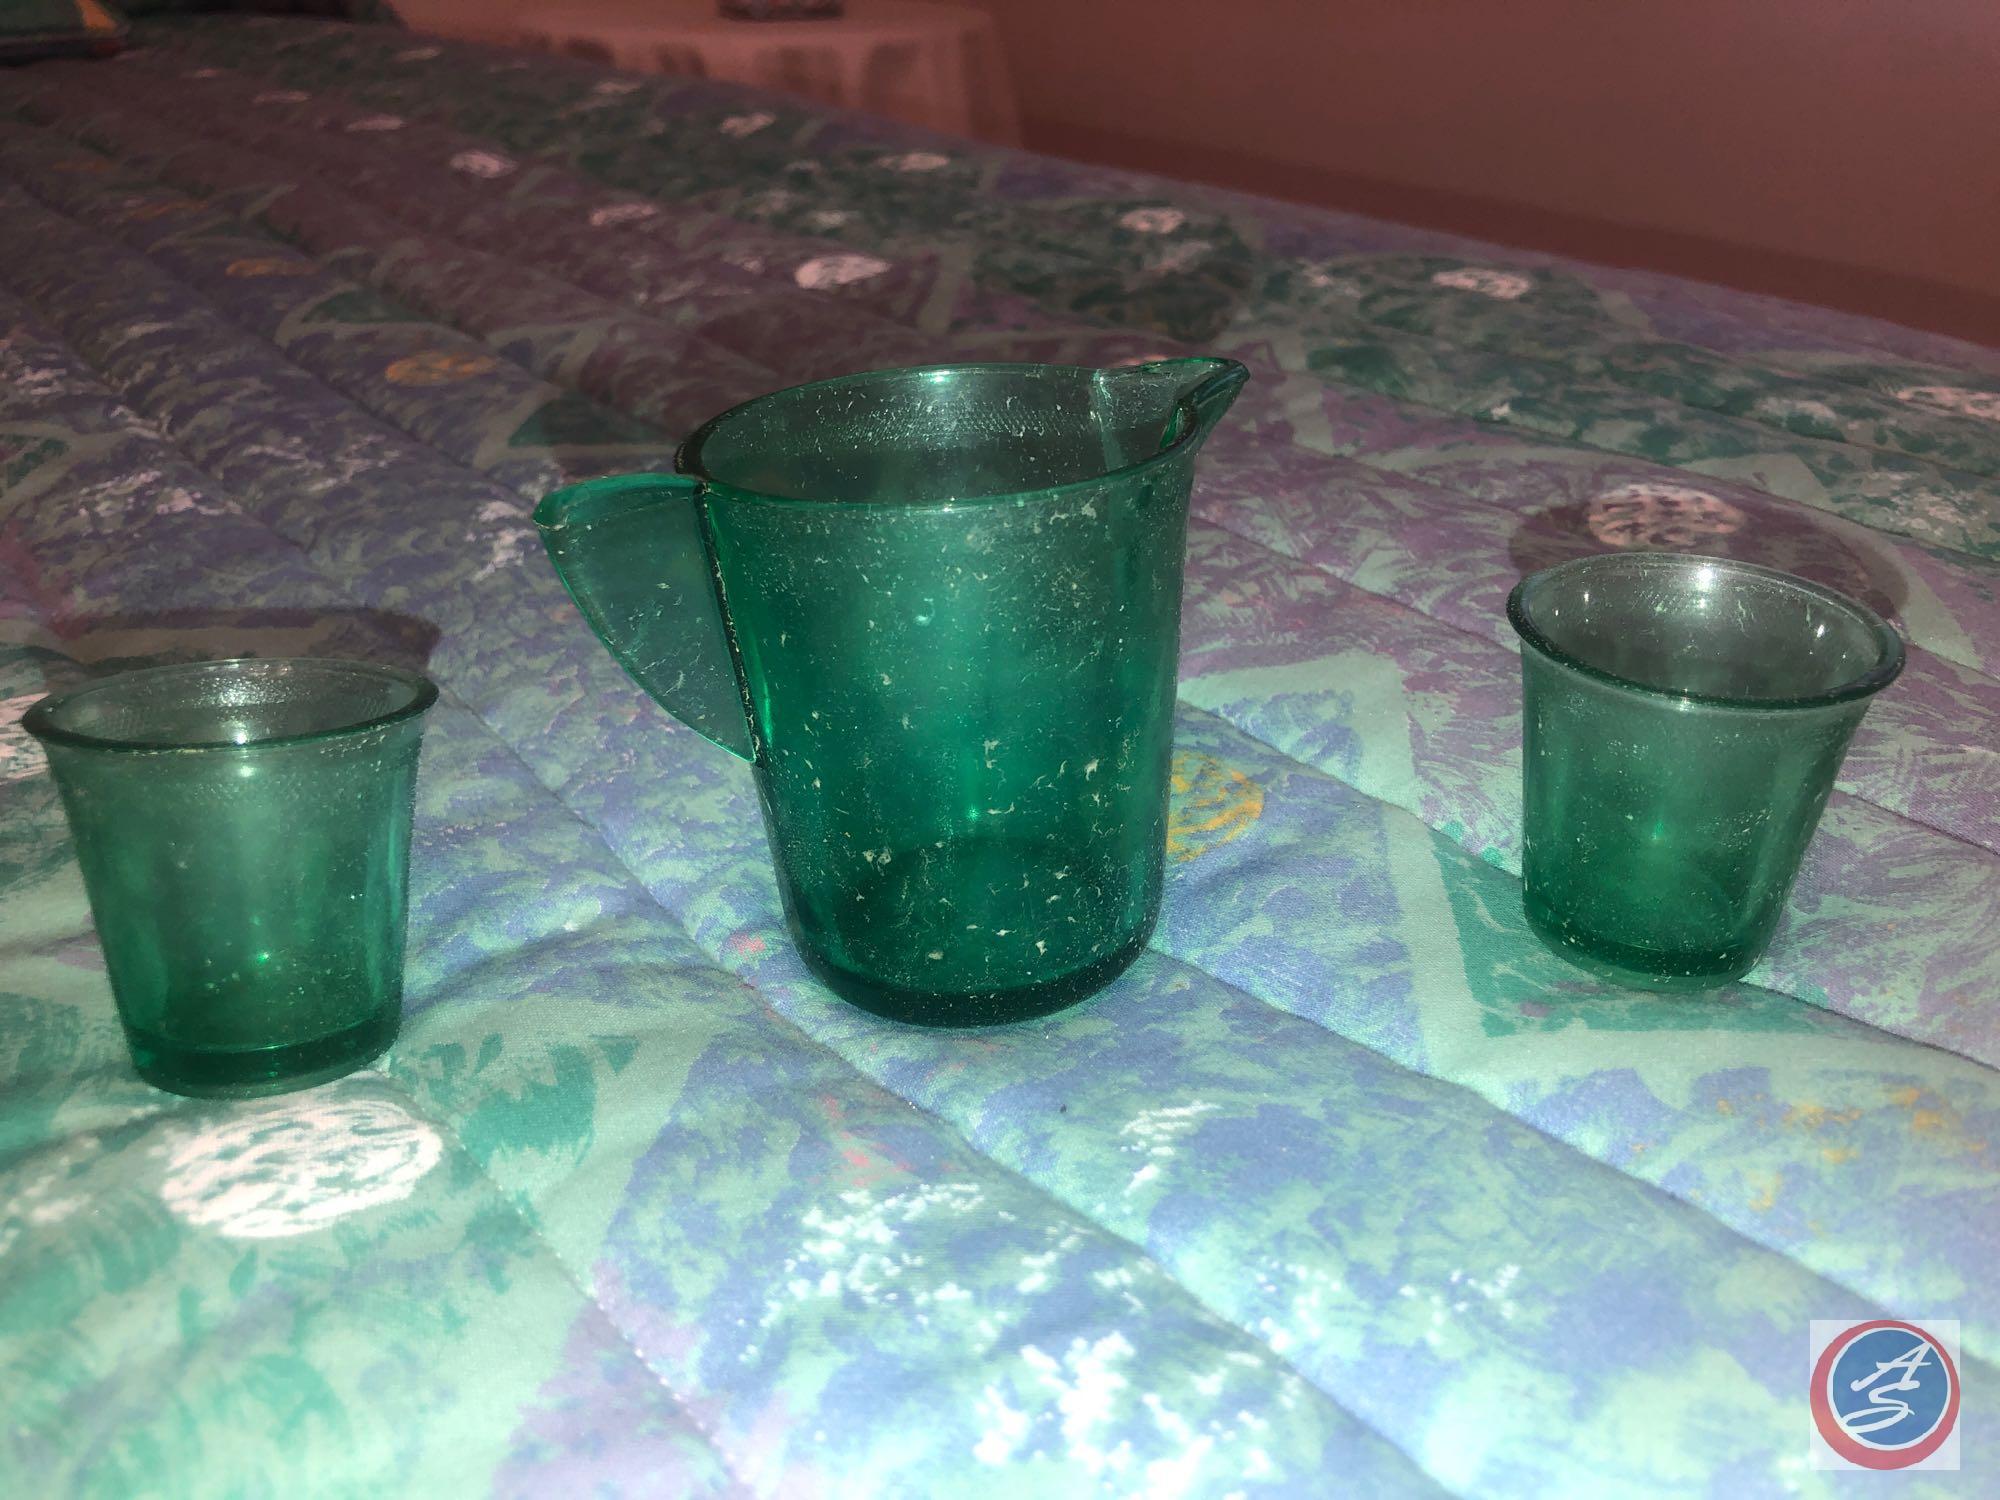 Floral China Marked Made In Japan, Green Glass Pitcher and Matching Cups